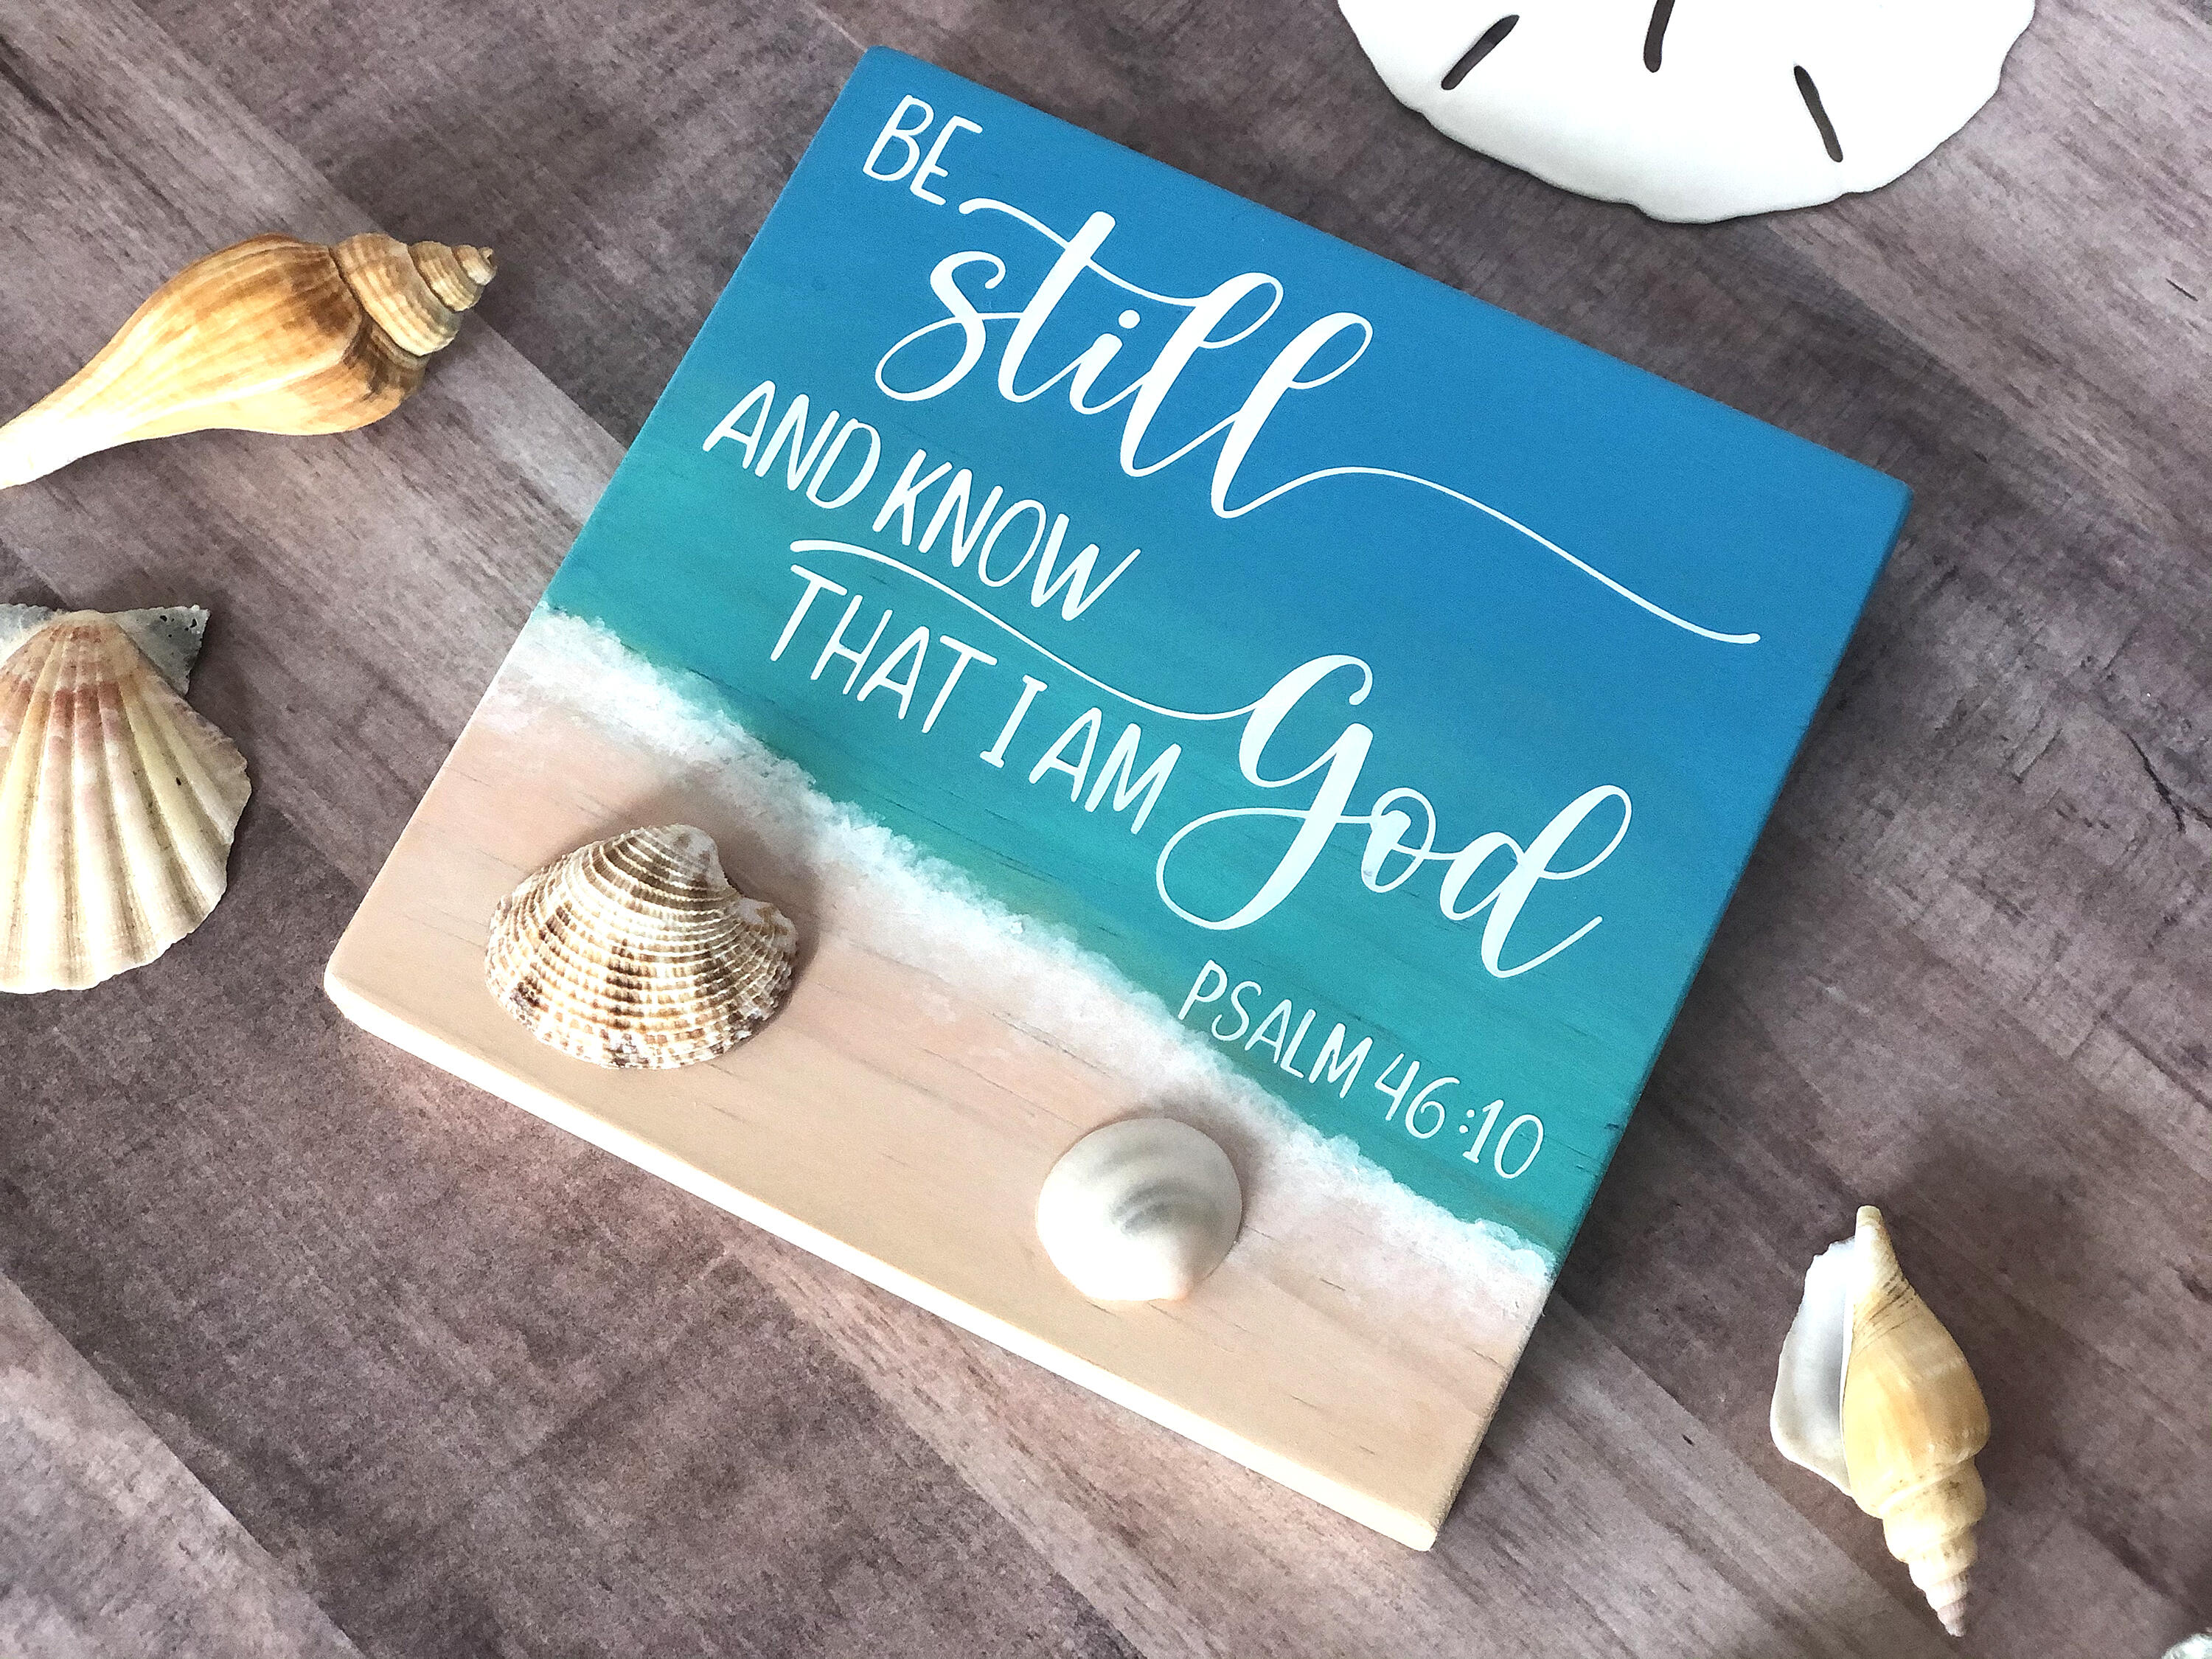 Be Still and Know that I am God, Psalm 46:10 Sign with real shells and a watercolor type background